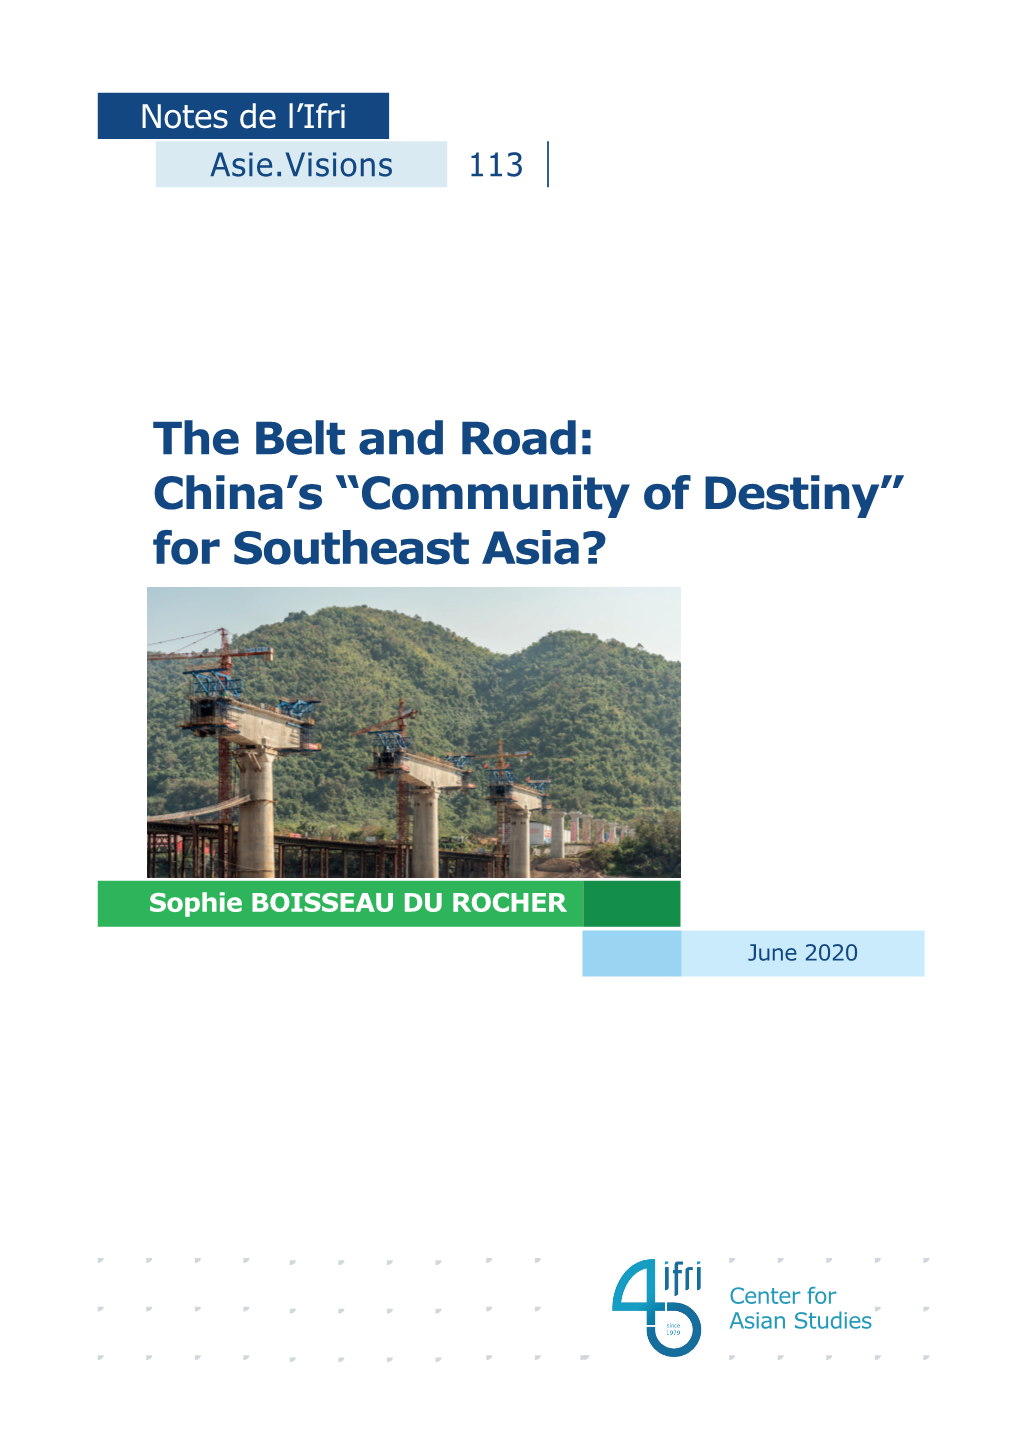 The Belt and Road: China's “Community of Destiny” For